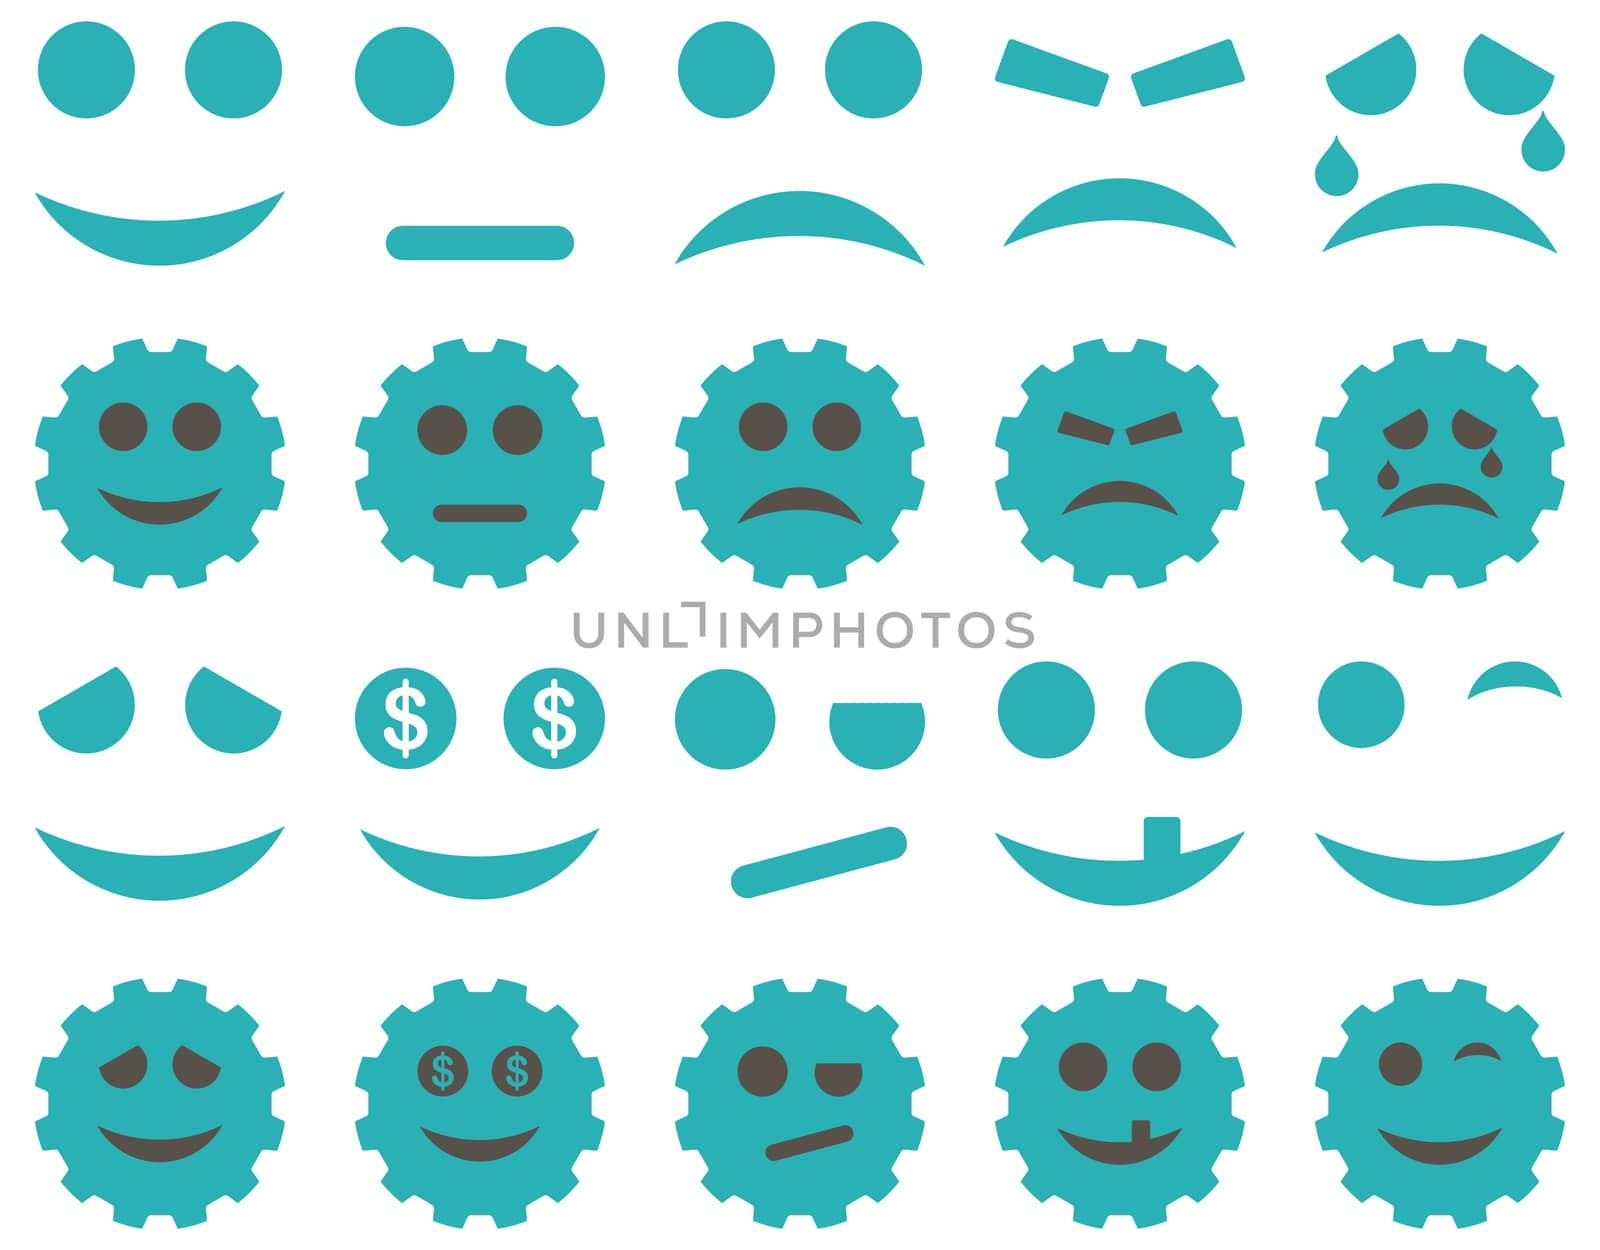 Tools, gears, smiles, emoticons icons by ahasoft